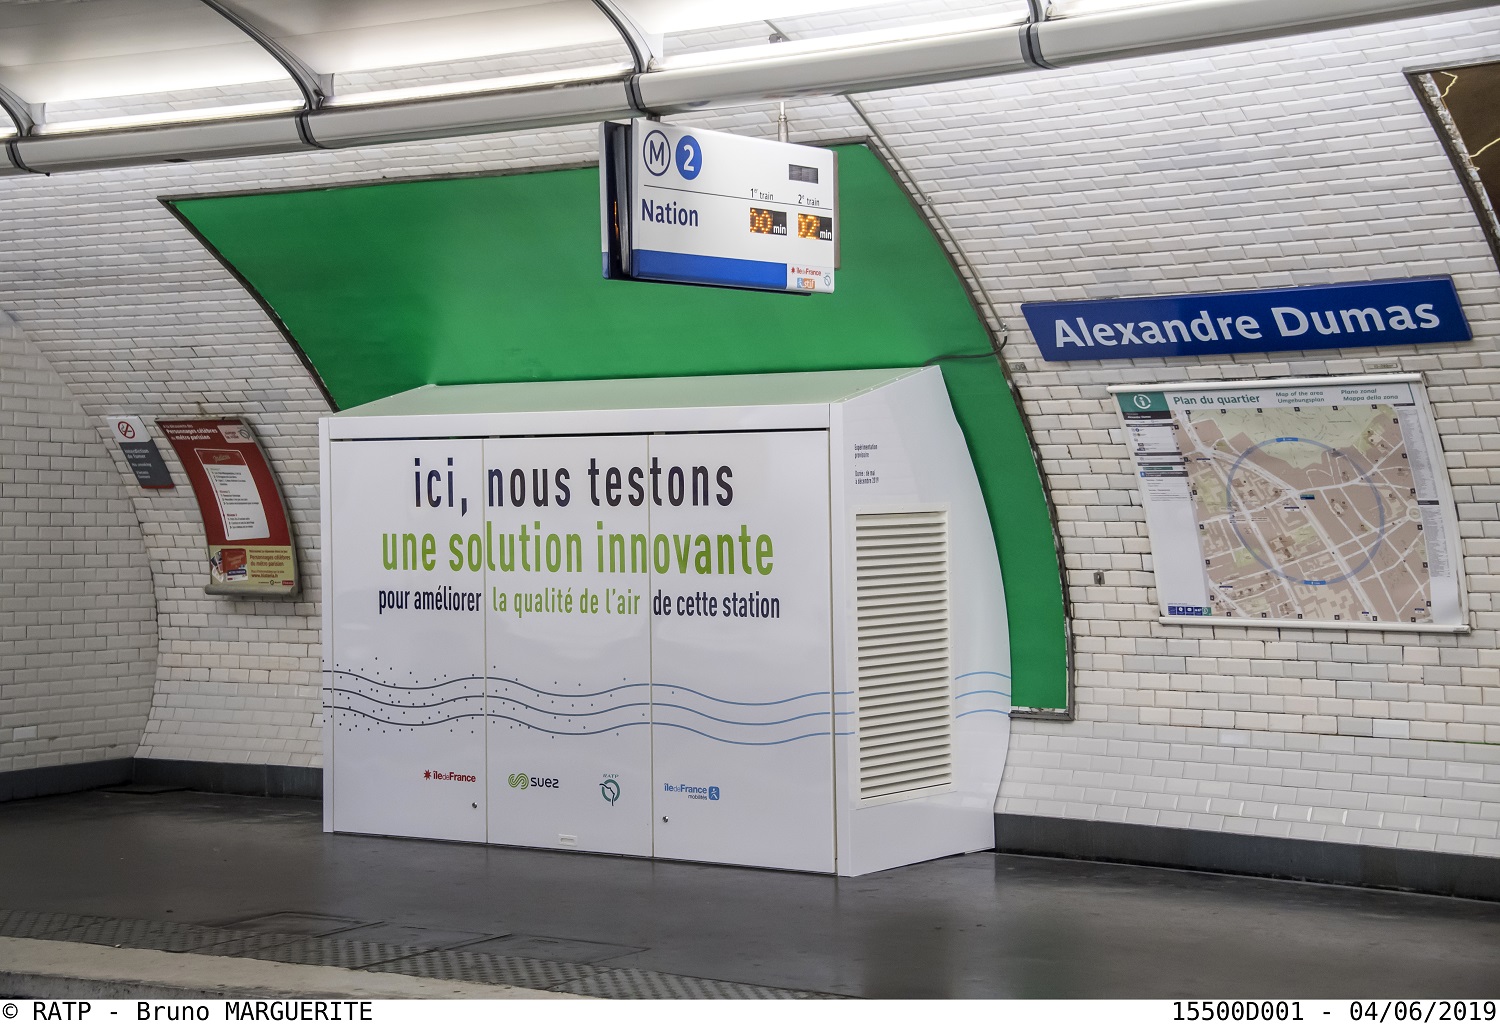 The IP’AIR solution from Suez is initially being tested in the Alexandre Dumas underground station in Paris.